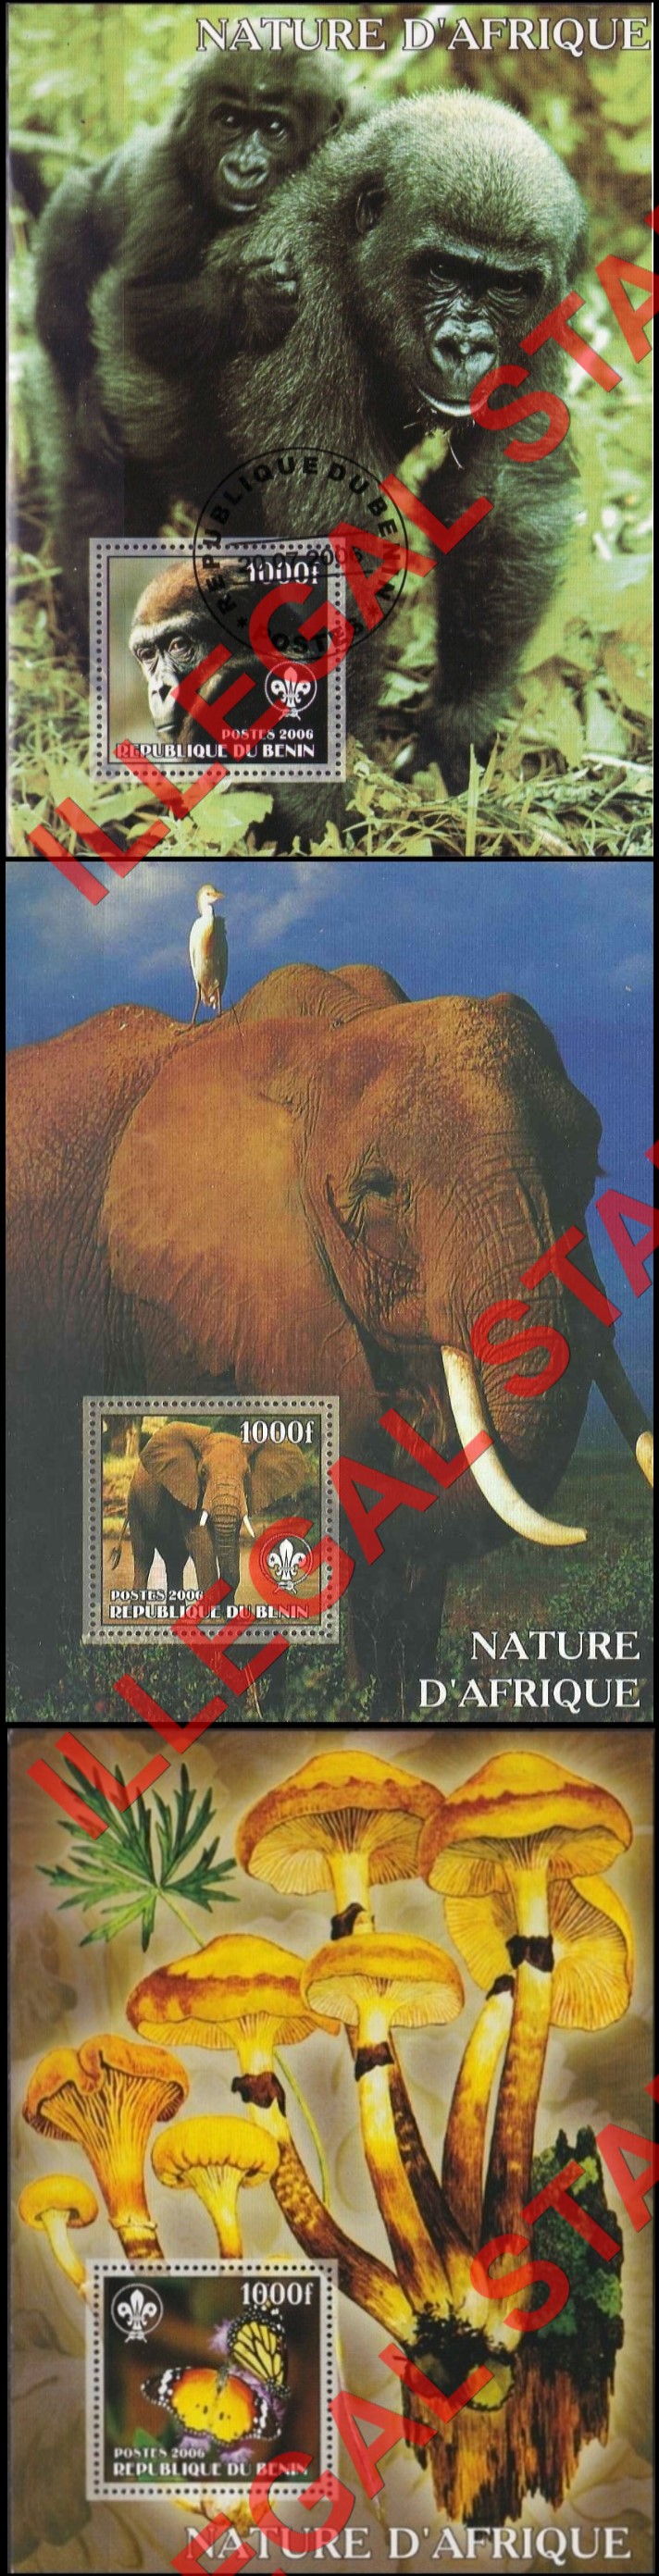 Benin 2006 Nature of Africa Illegal Stamp Souvenir Sheets of 1 (Part 2)